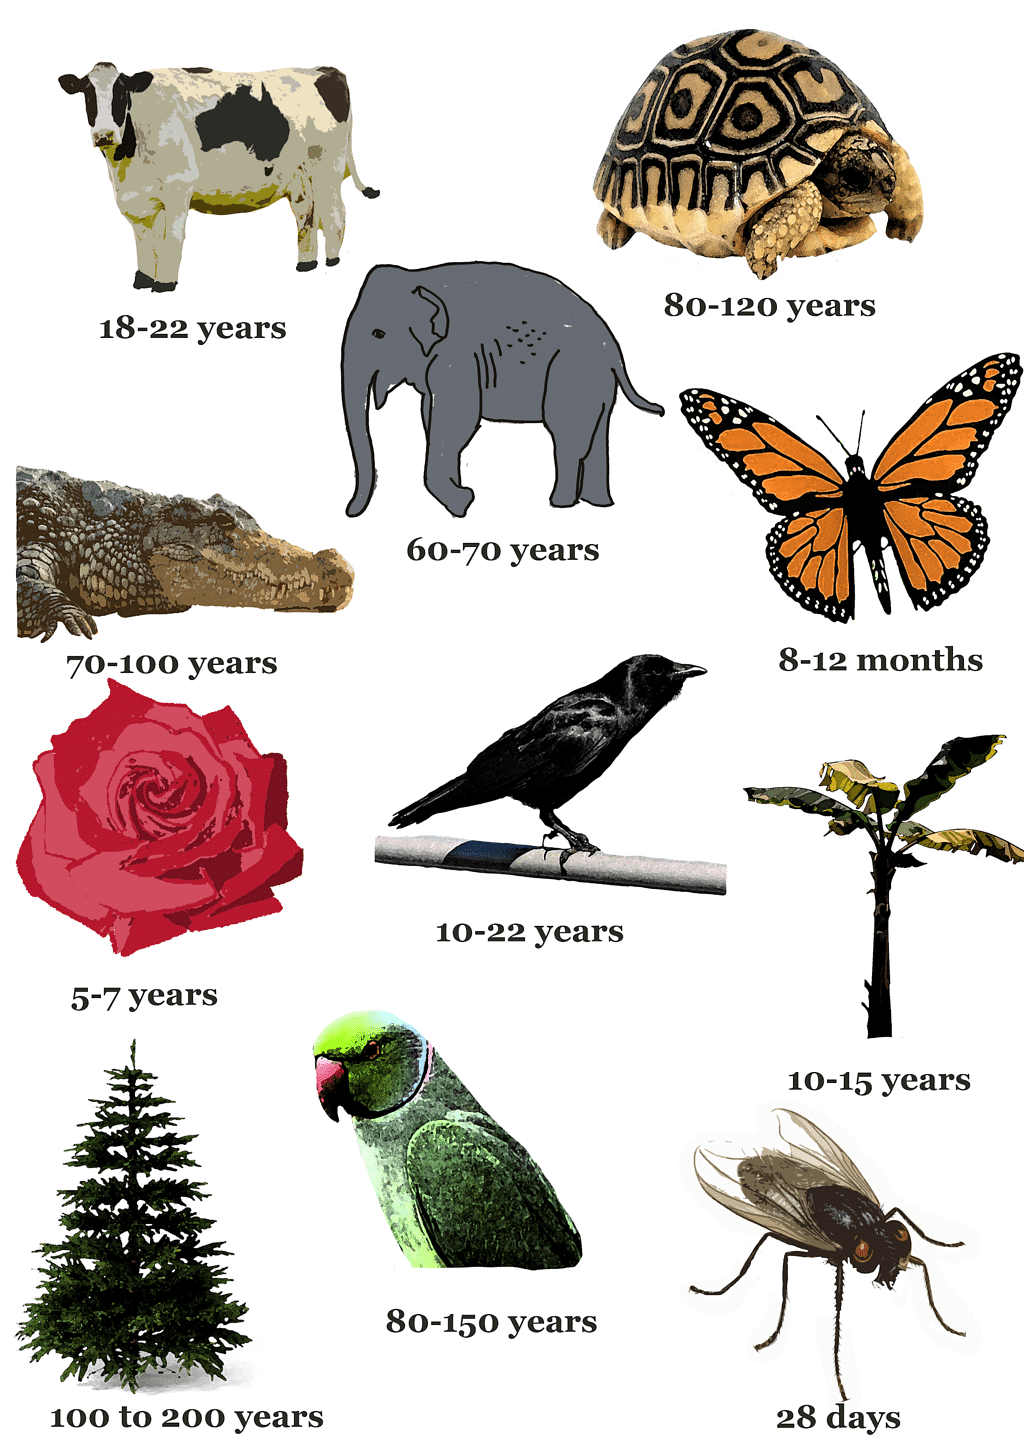 The lifespan of different Organisms